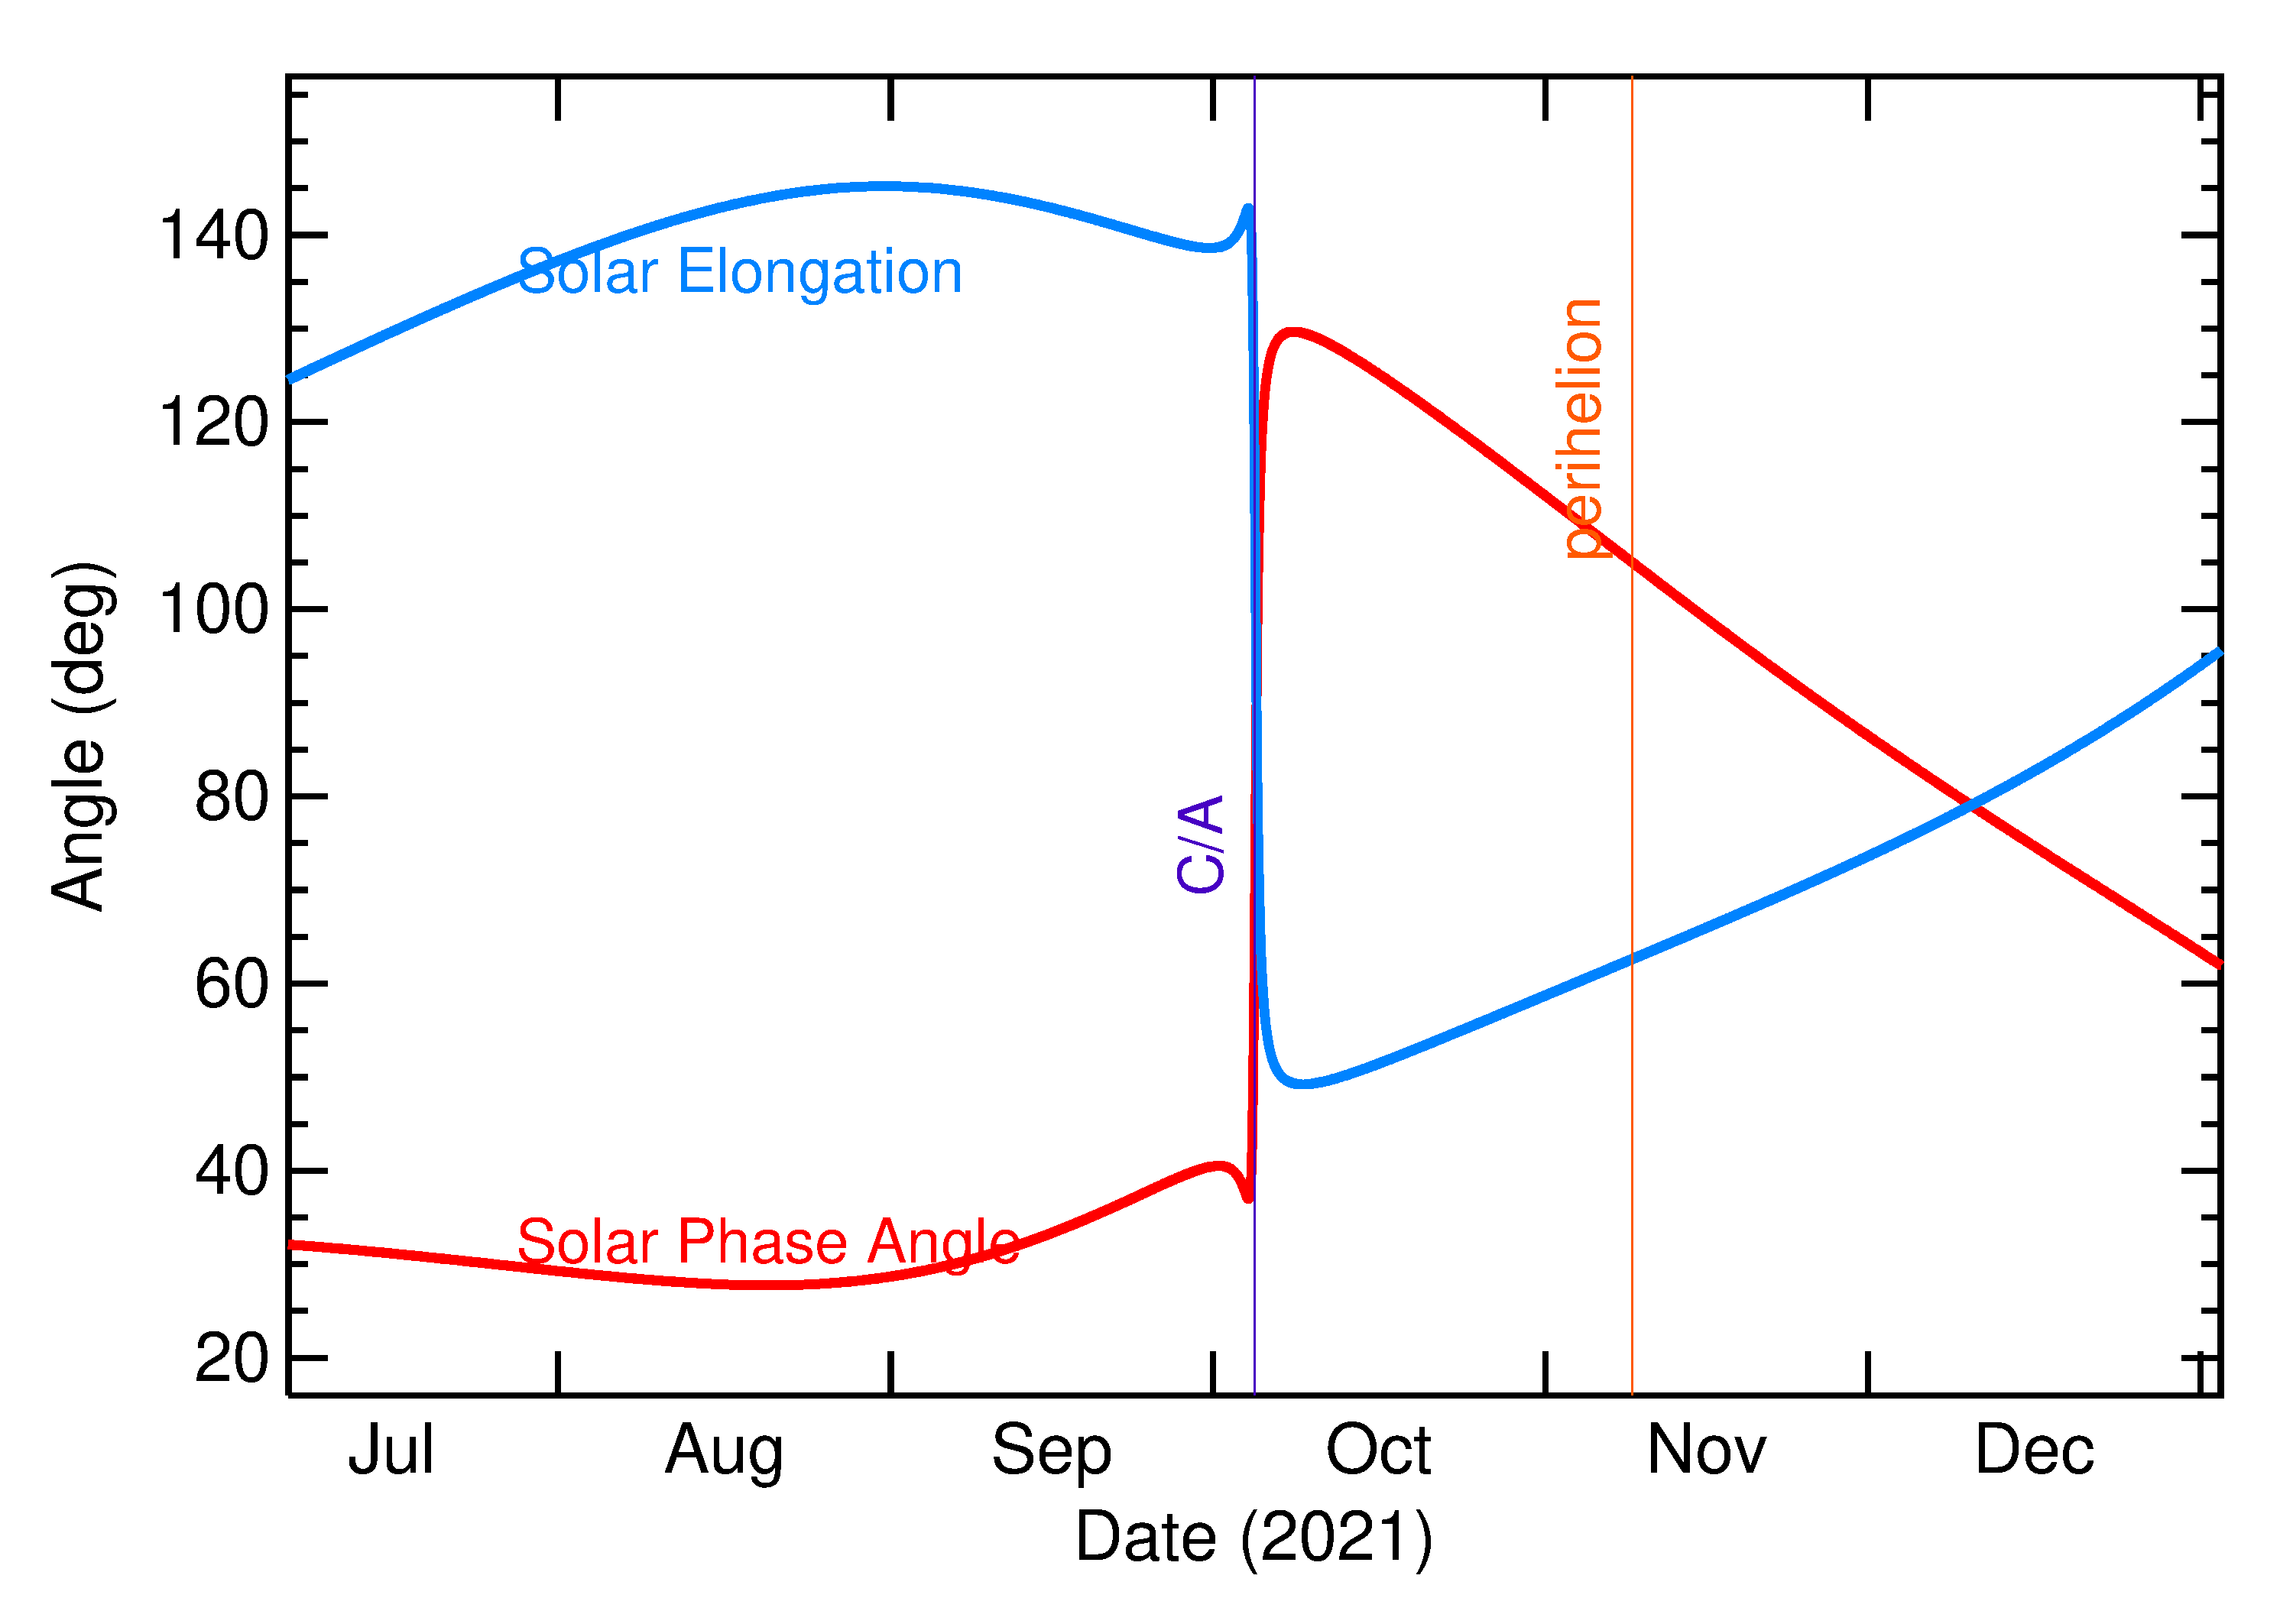 Solar Elongation and Solar Phase Angle of 2021 TG1 in the months around closest approach